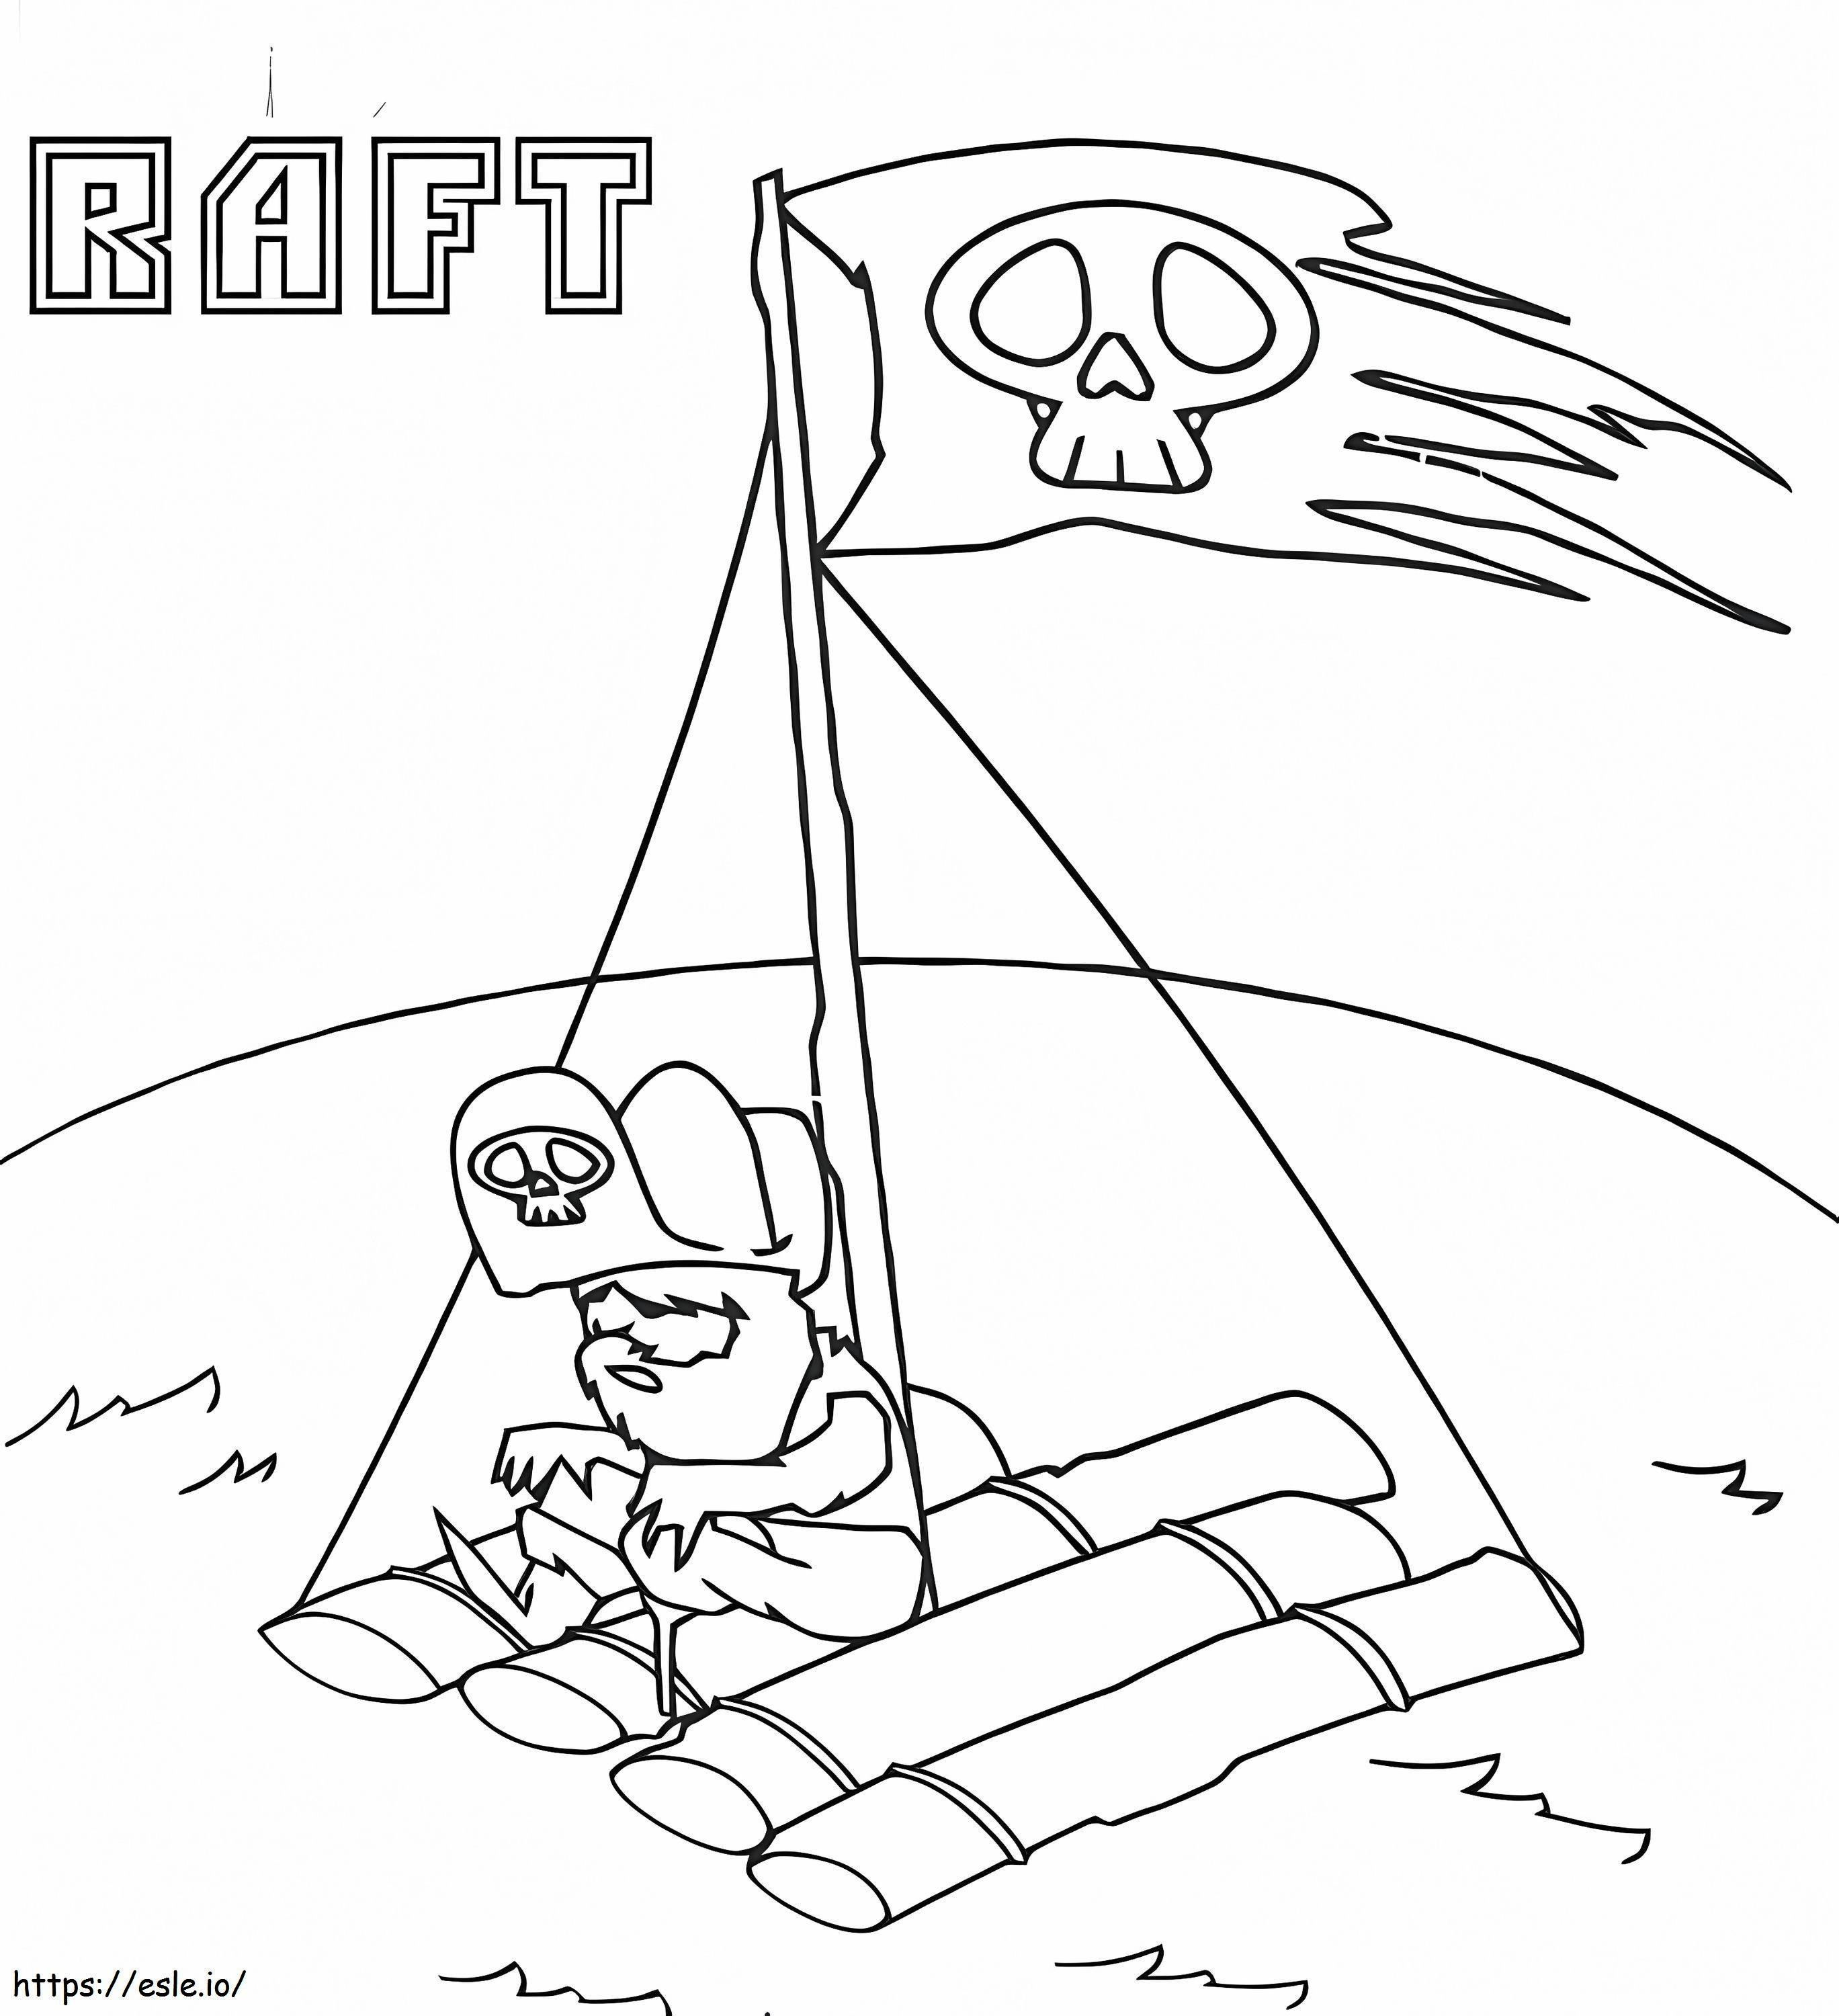 Pirate On A Raft coloring page